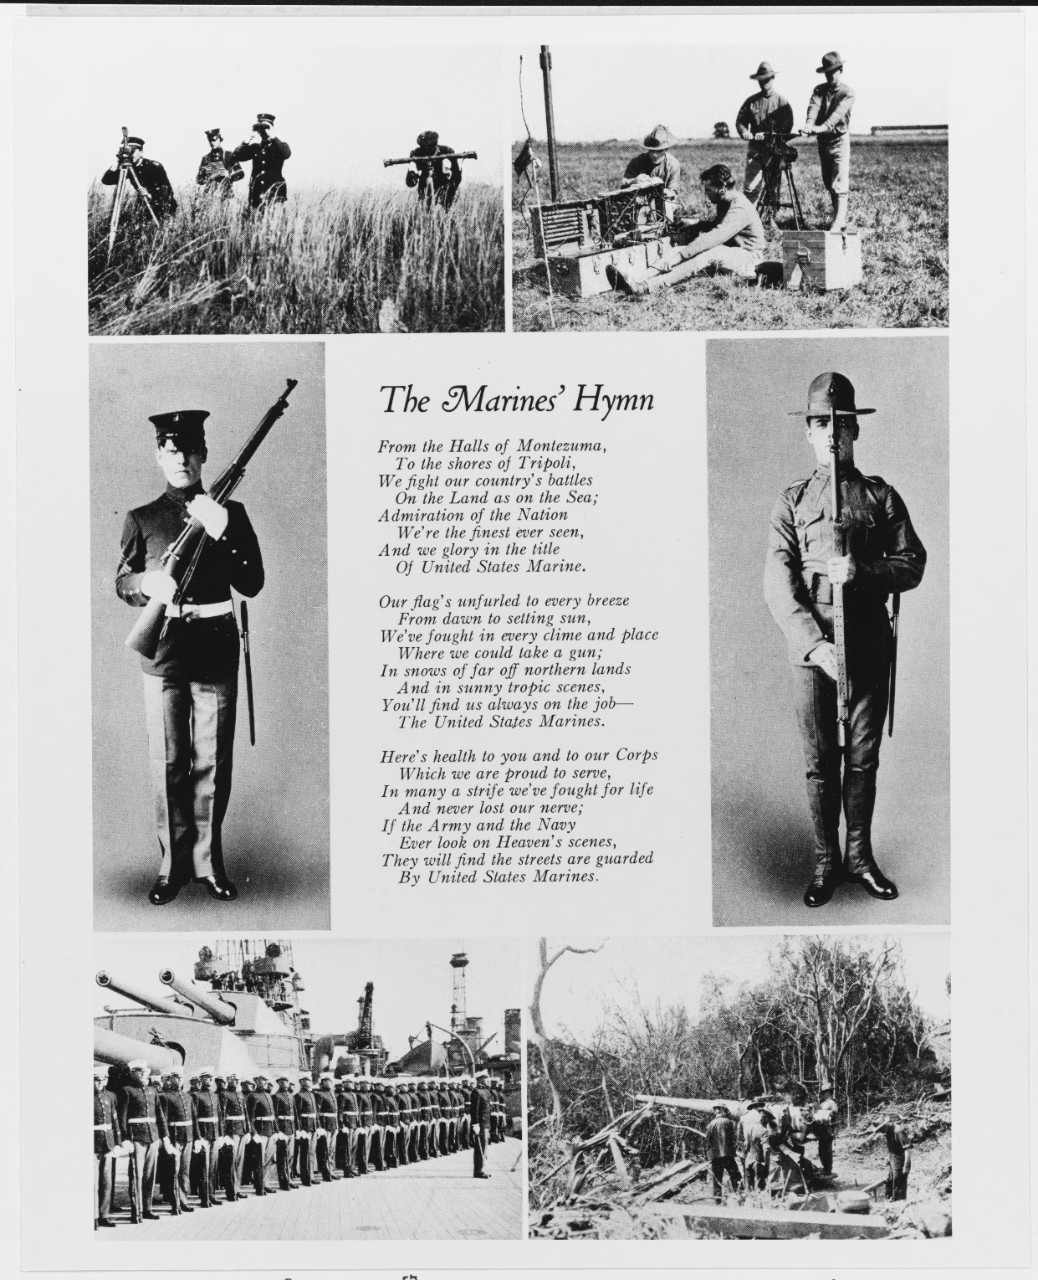 The Marines' Hymn. May 1917. Photo montage depicting Marines at work.